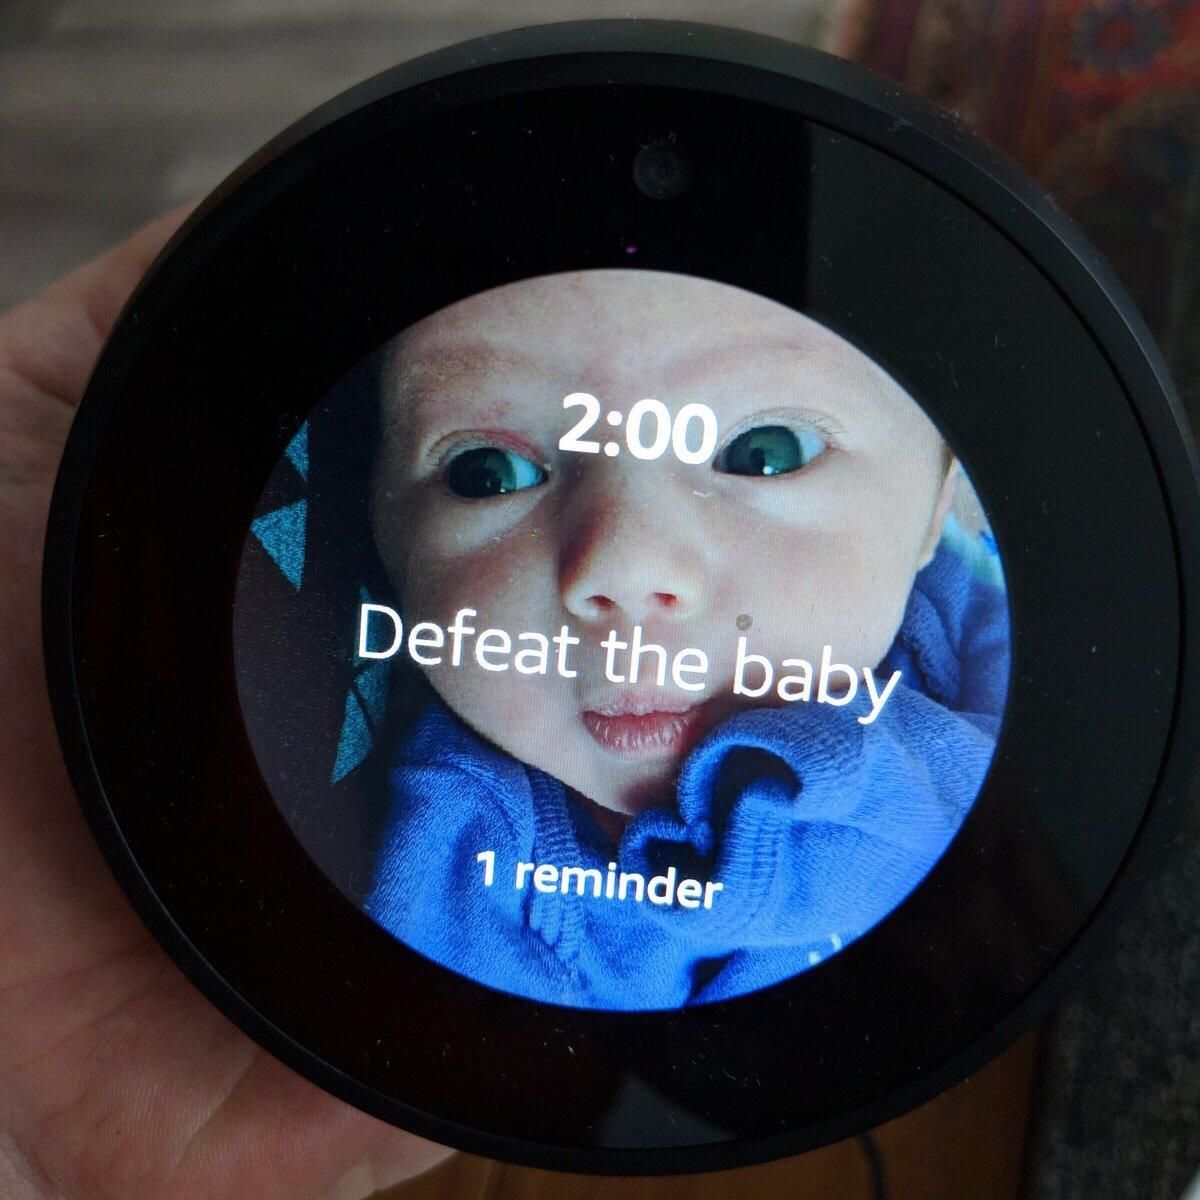 Alexa, remind me to feed the baby